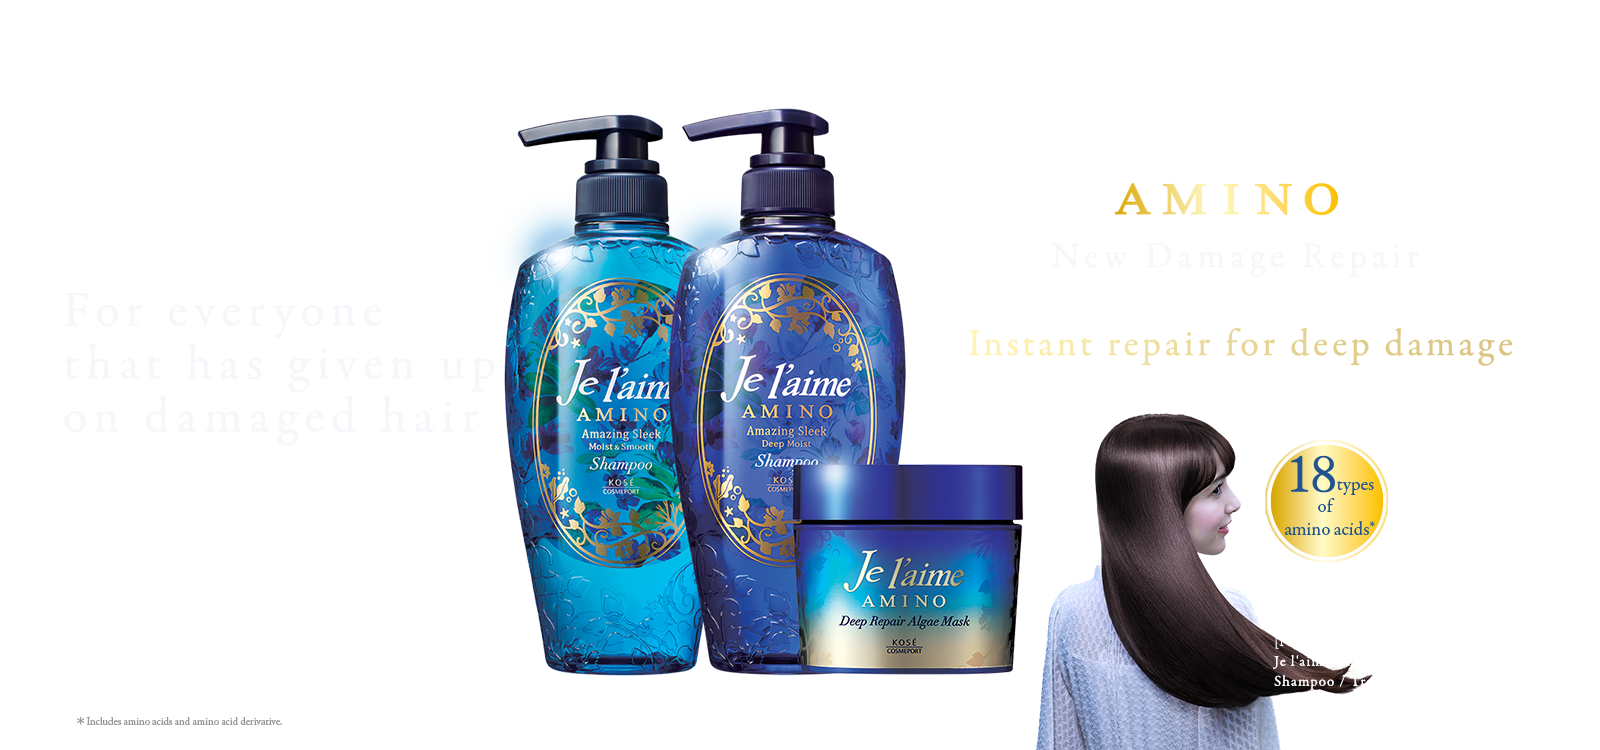 For everyone that has given up on damaged hair. Je l'aime AMINO New Damage Repair. Instant repair for deep damage